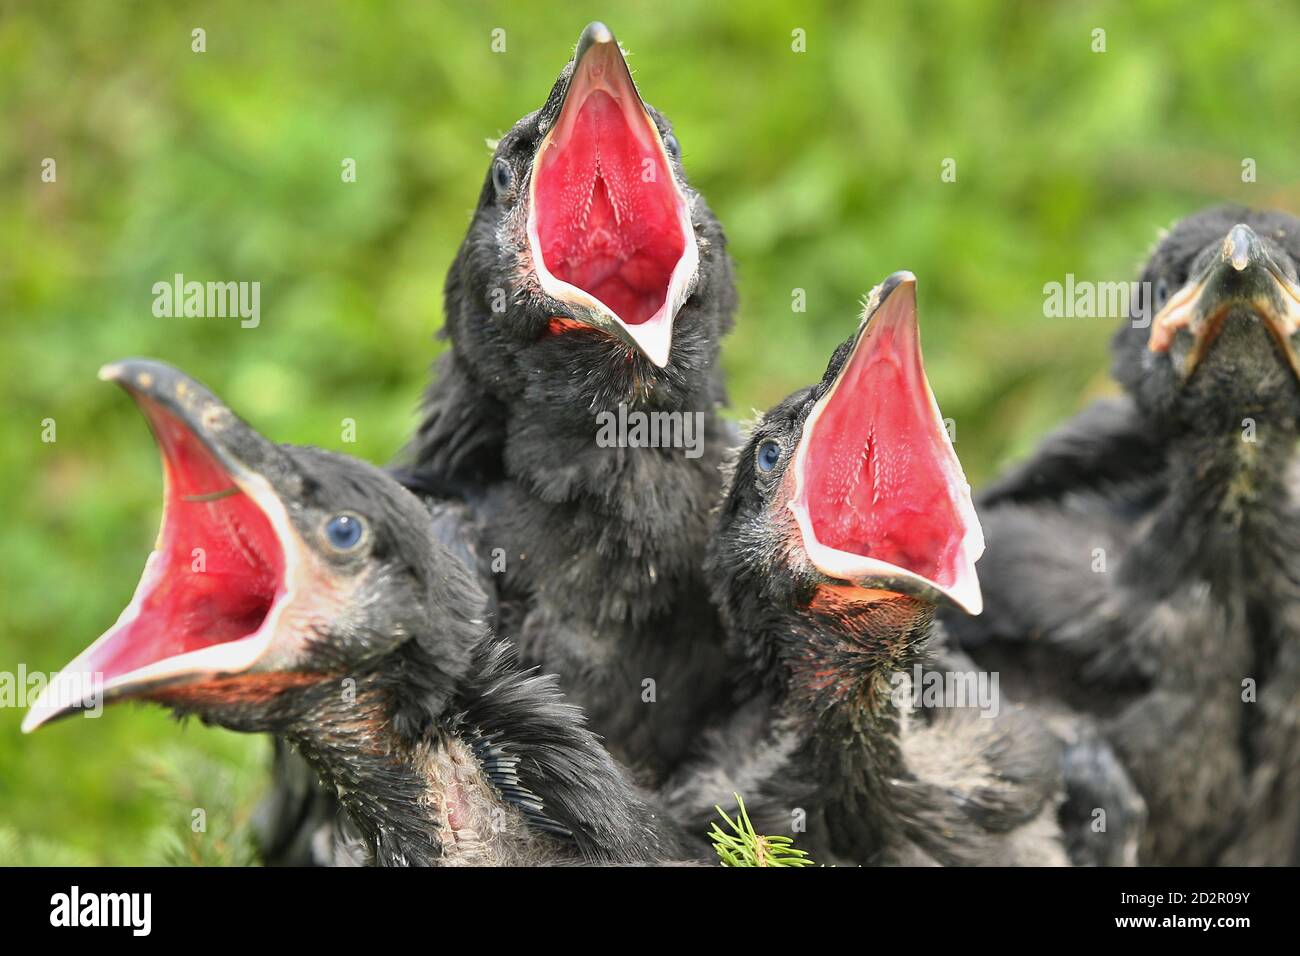 Black raven in the nature habitat. Young raven birds in the nest. Stock Photo